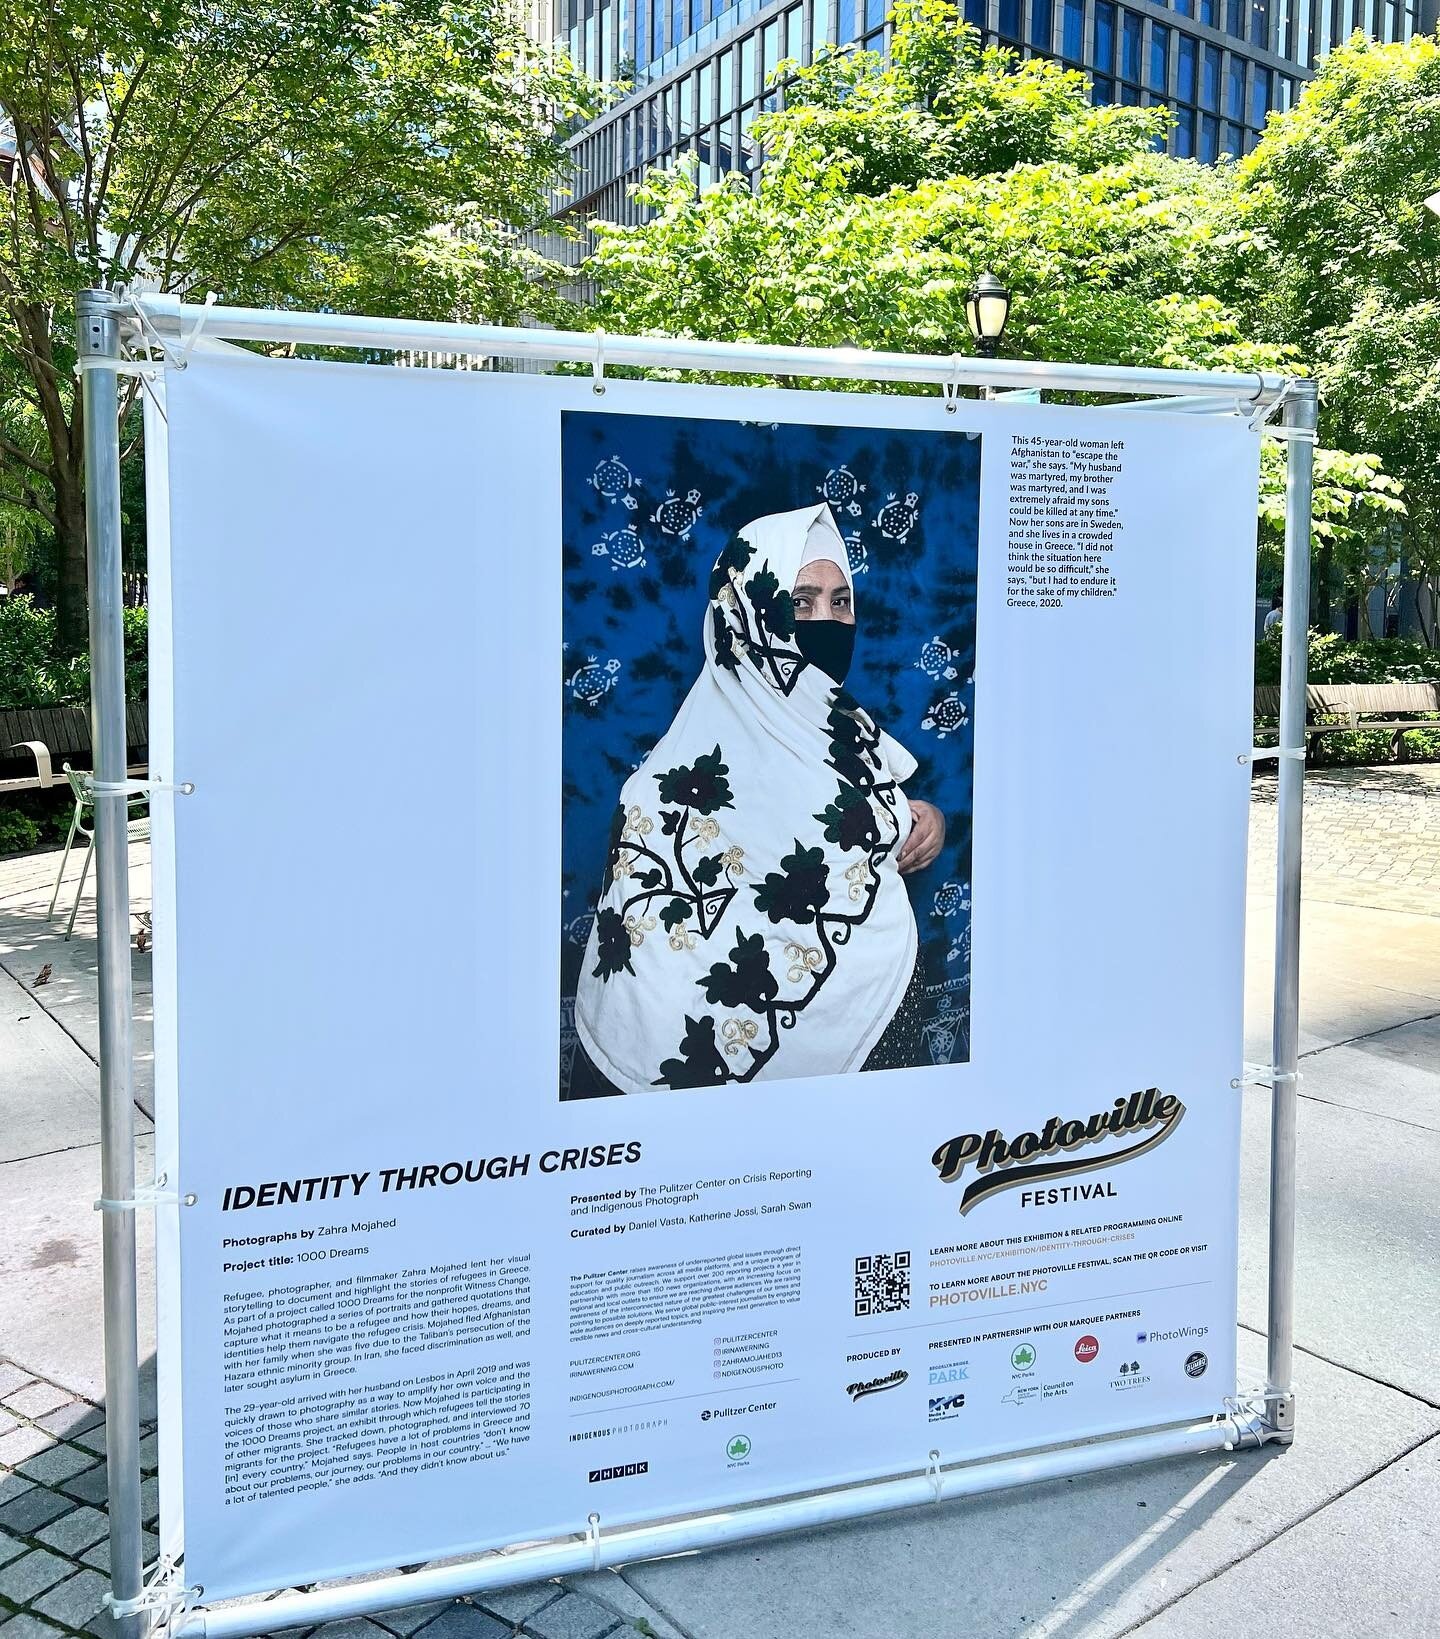 We are excited to share that the project Identity Through Crises is being exhibited in Bella Abzug Park as part of @photoville Festival 2022! 

The photography exhibition will be up until the end of September so make sure to stop by the park to check